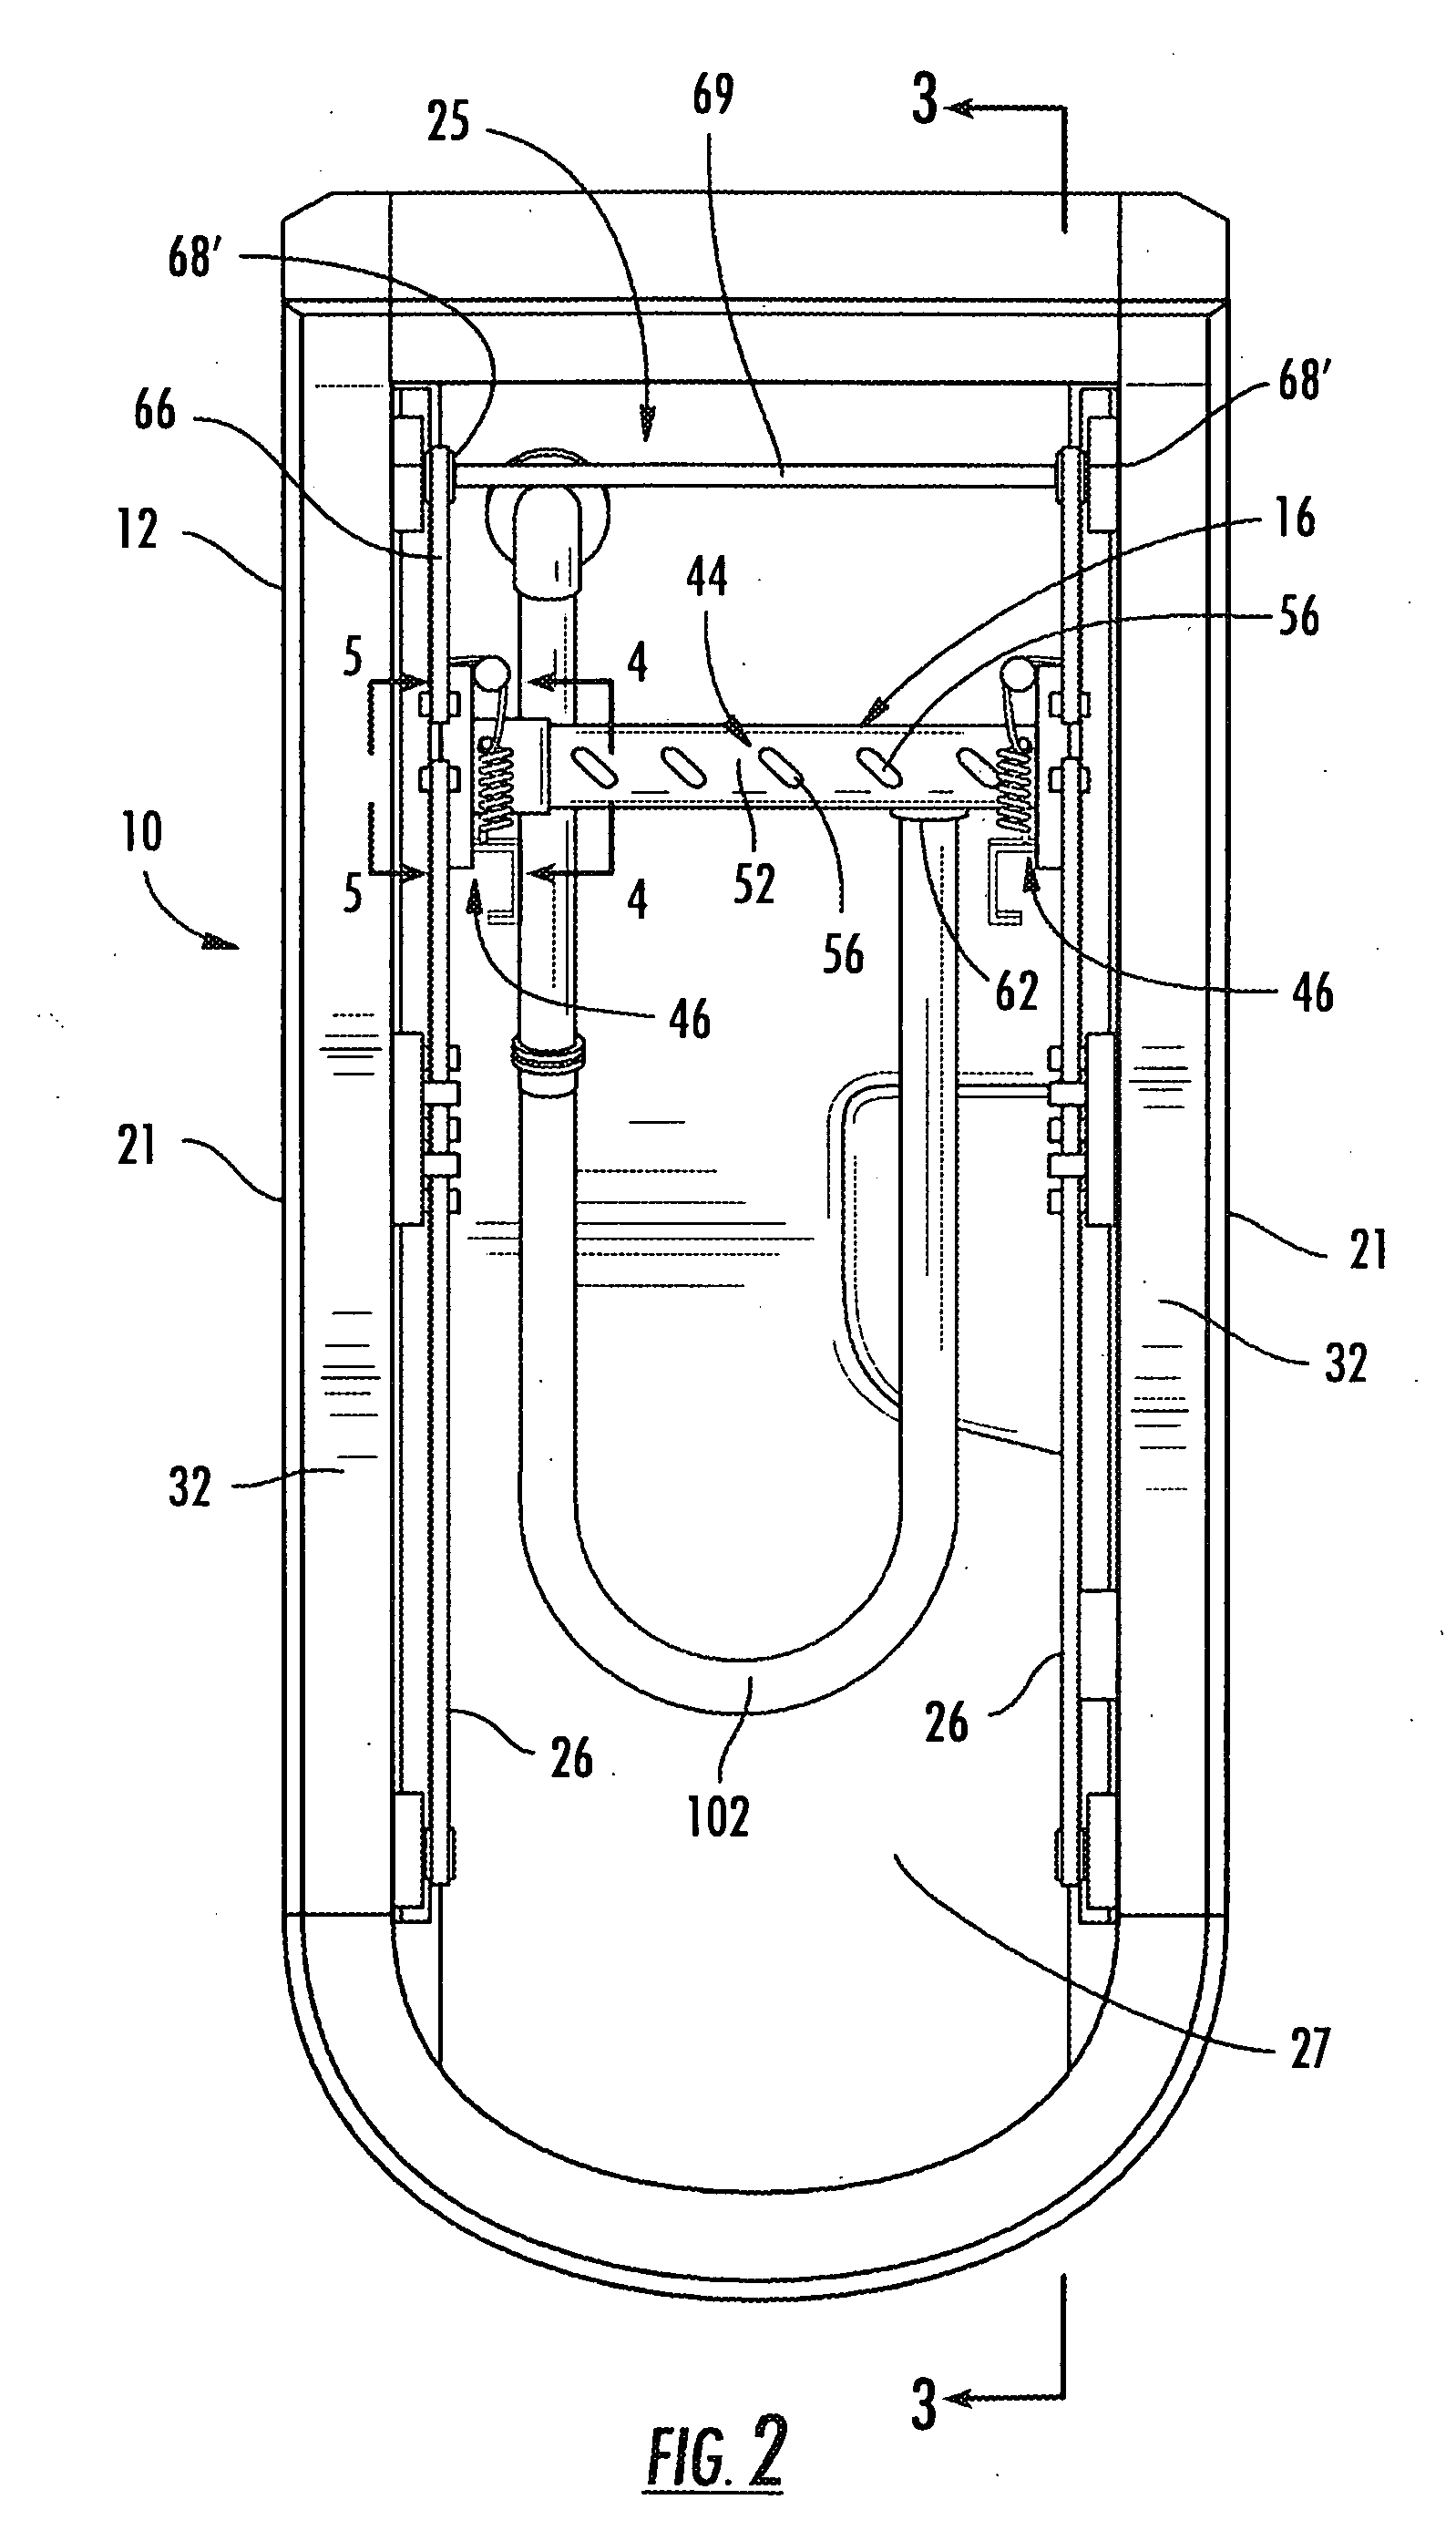 Apparatus for dry hydro-therapy body massage of a user in a seated position